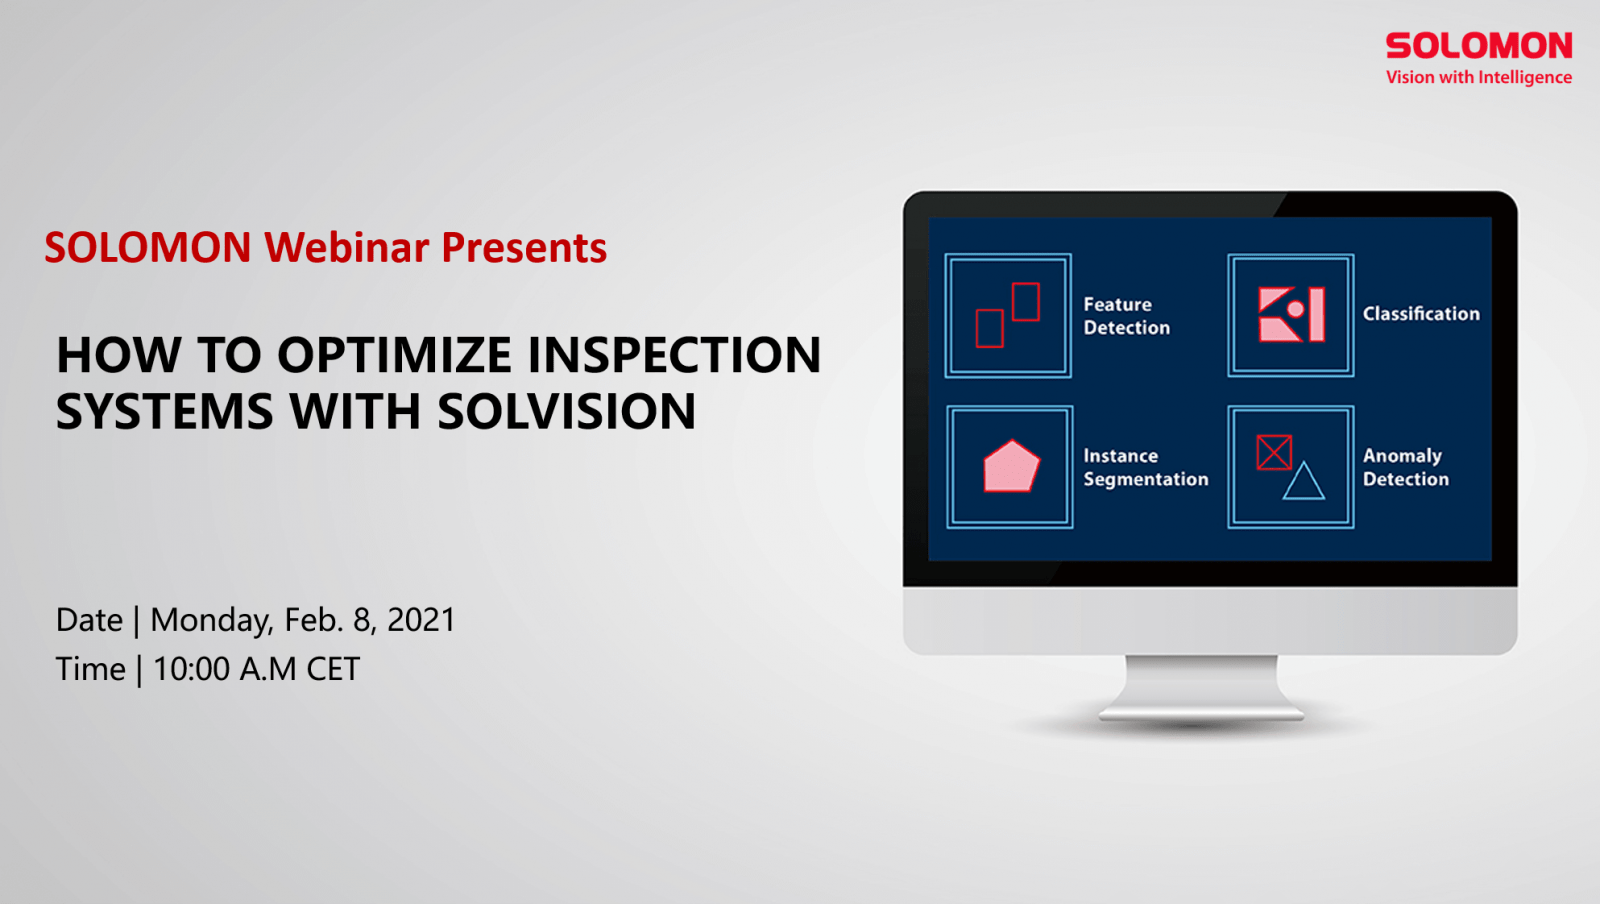 Solomon webinar - How to optimize inspection systems